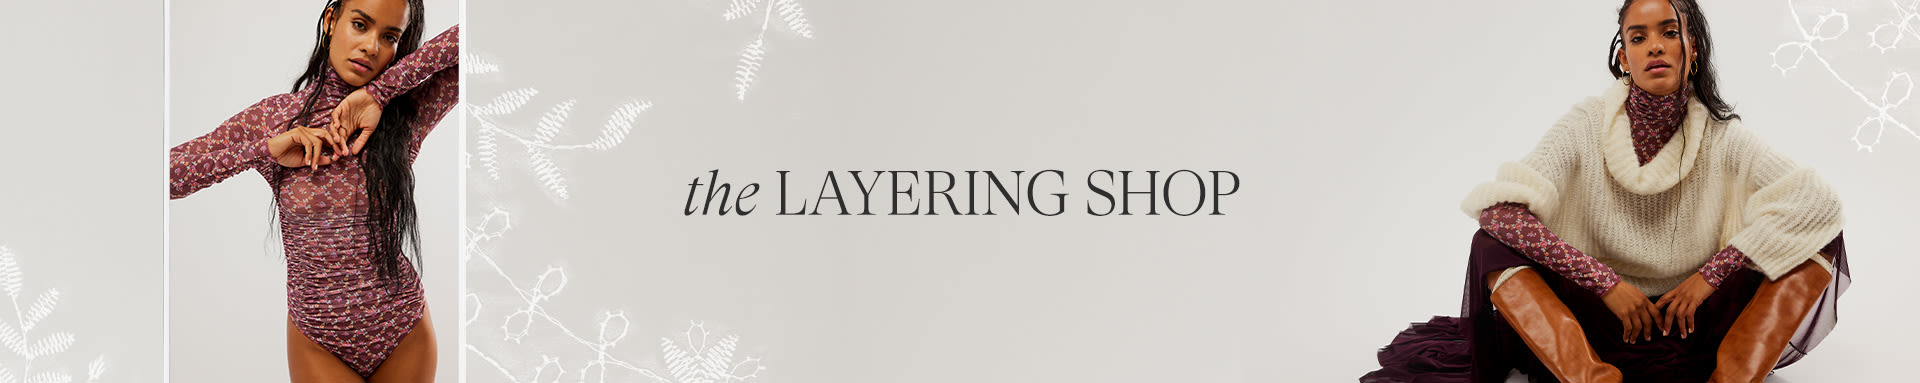 FP's The Layering Shop